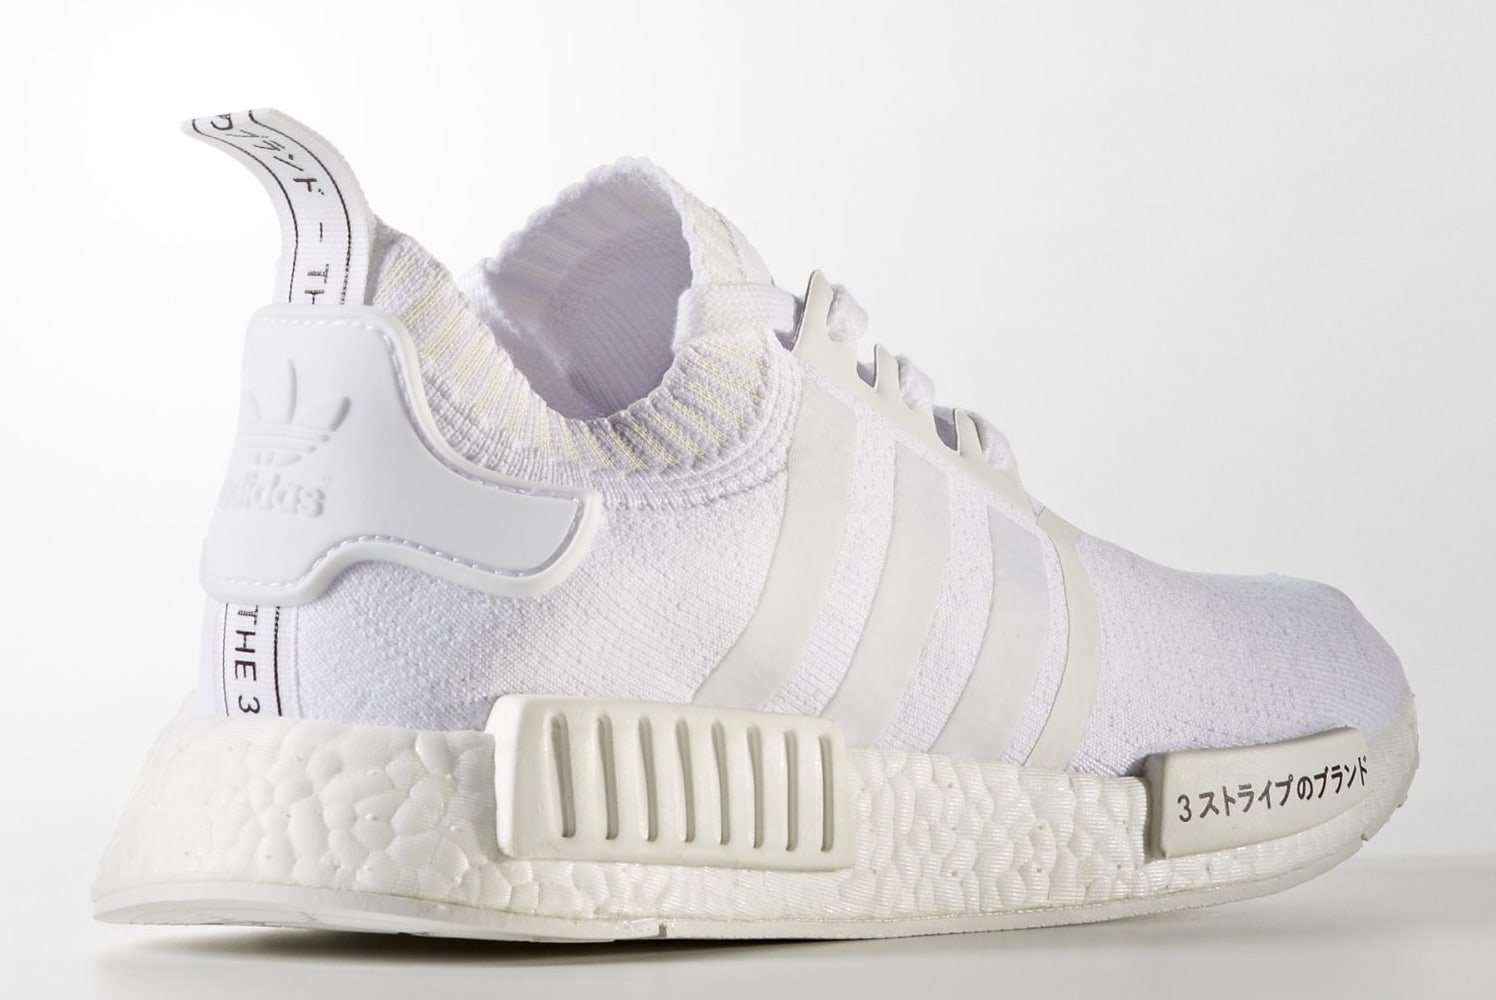 Adidas NMD_R1 PK &#x27;Japan Pack&#x27; BZ0221 (Lateral)